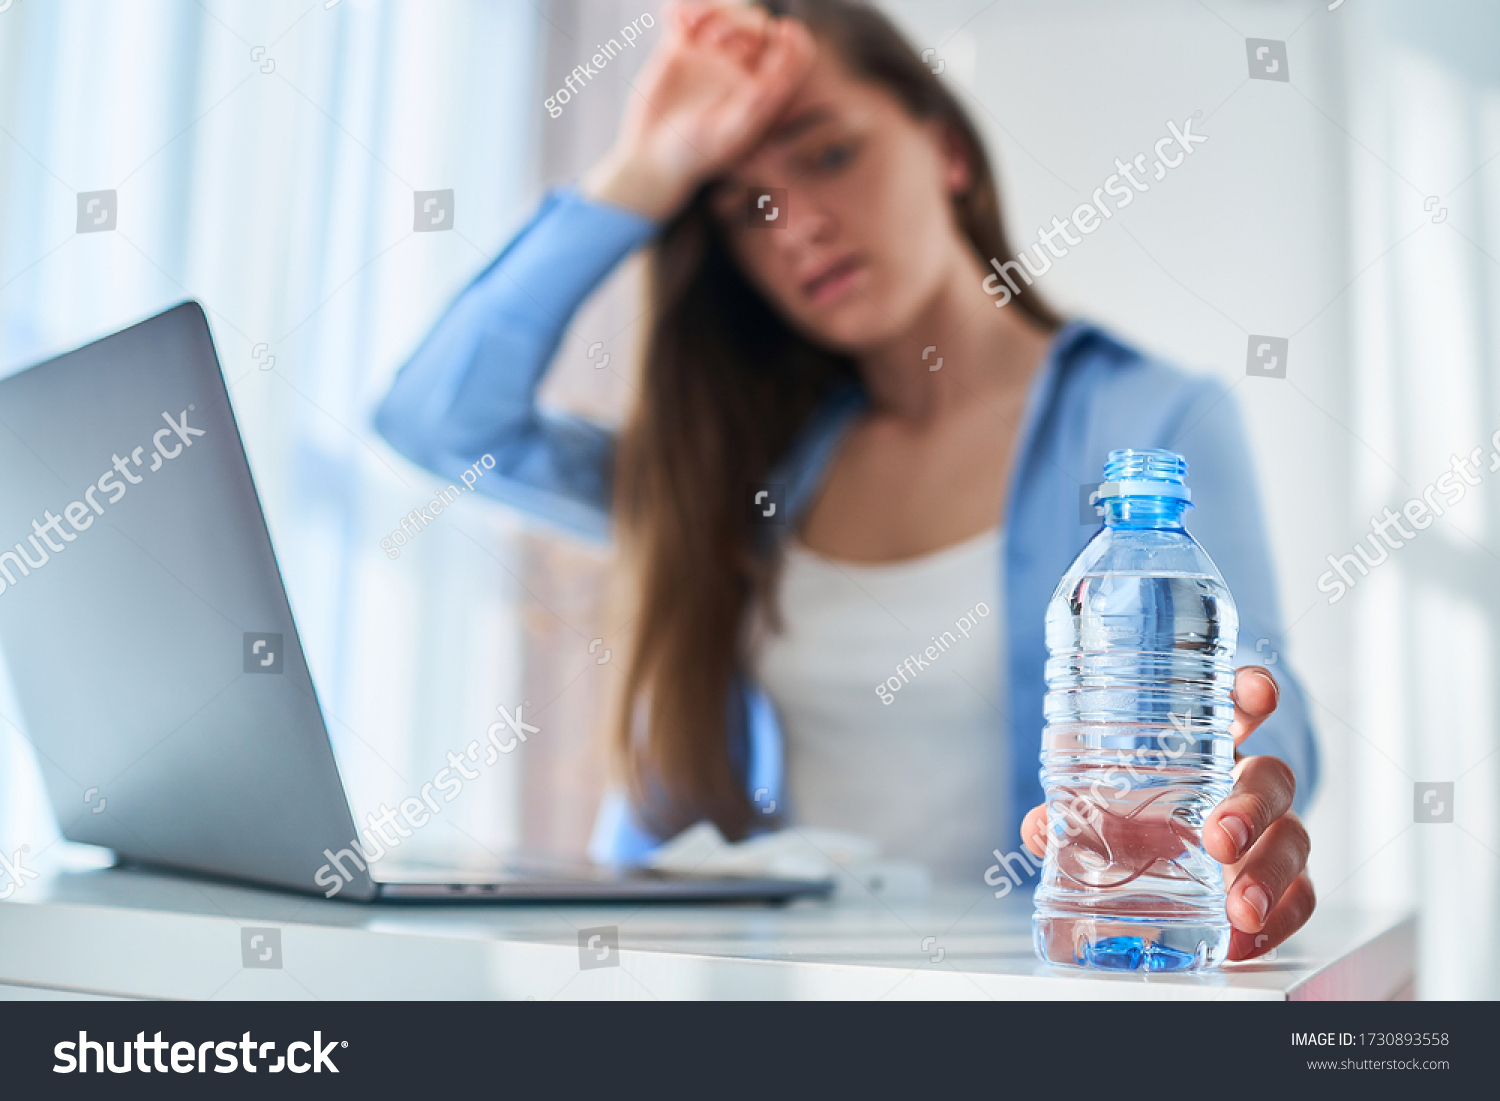 Upset tired working woman suffering from heat, thirst and hot weather cools down with cold water bottle during online work at computer at warm summer day #1730893558